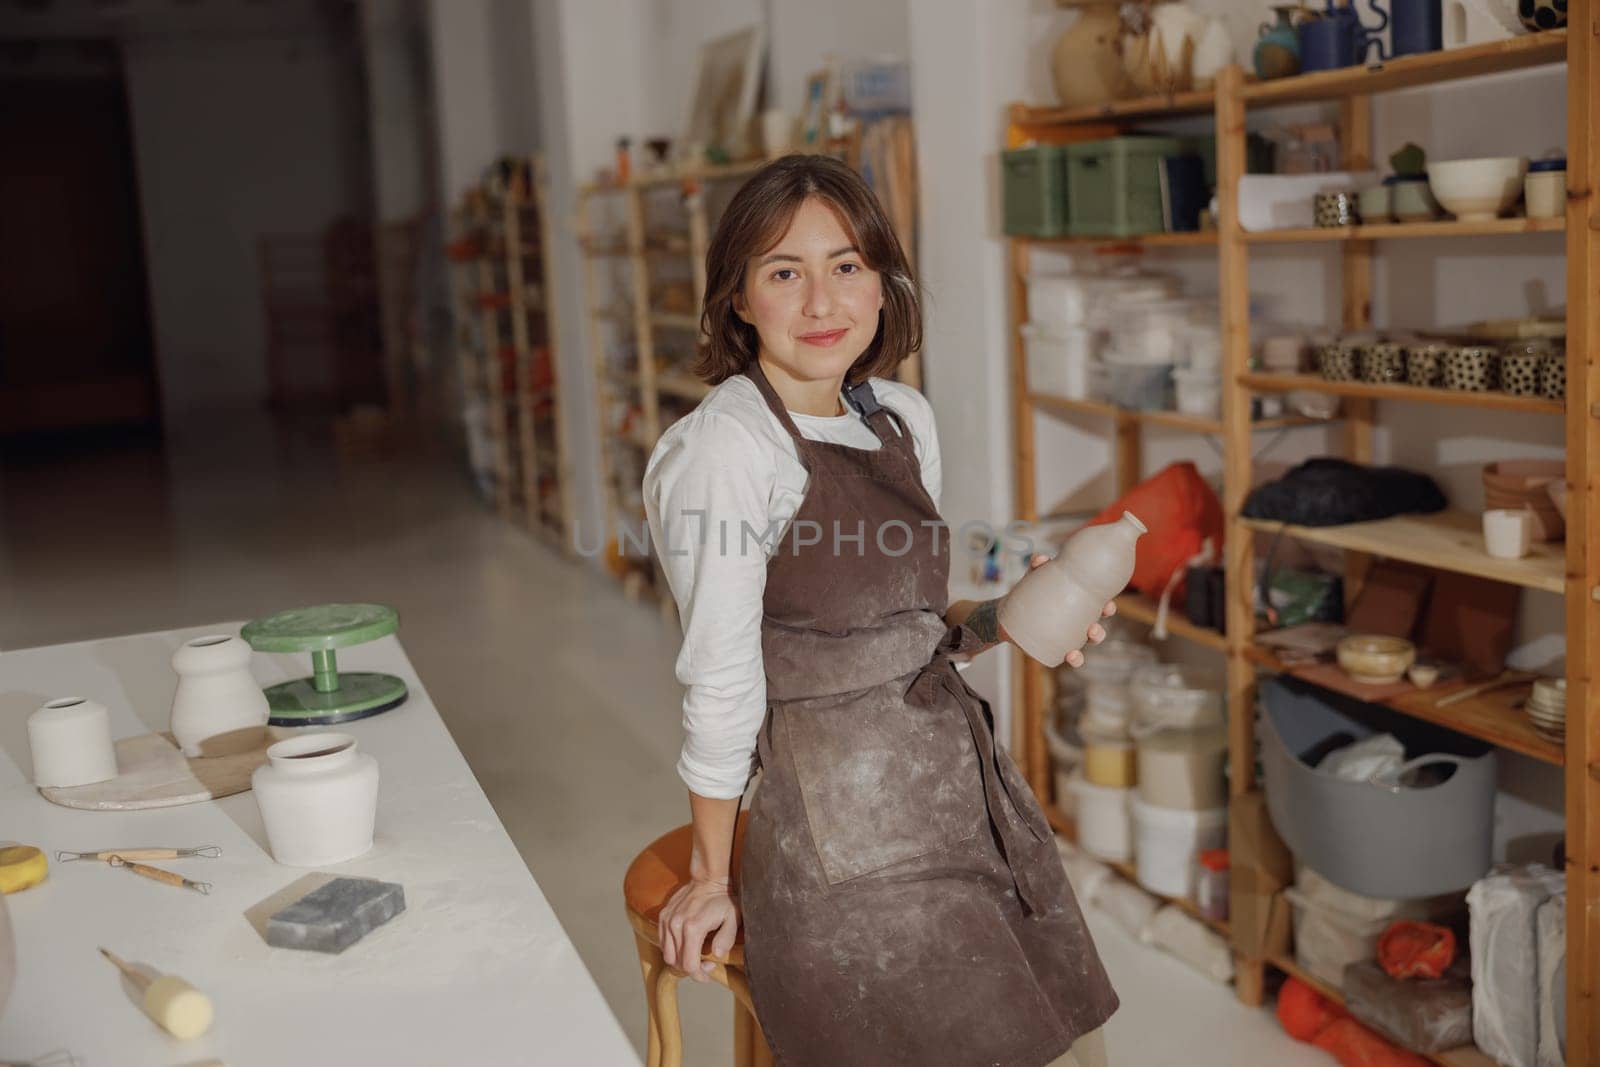 Smiling entrepreneur crafts woman holding mug in pottery studio while looking at camera by Yaroslav_astakhov